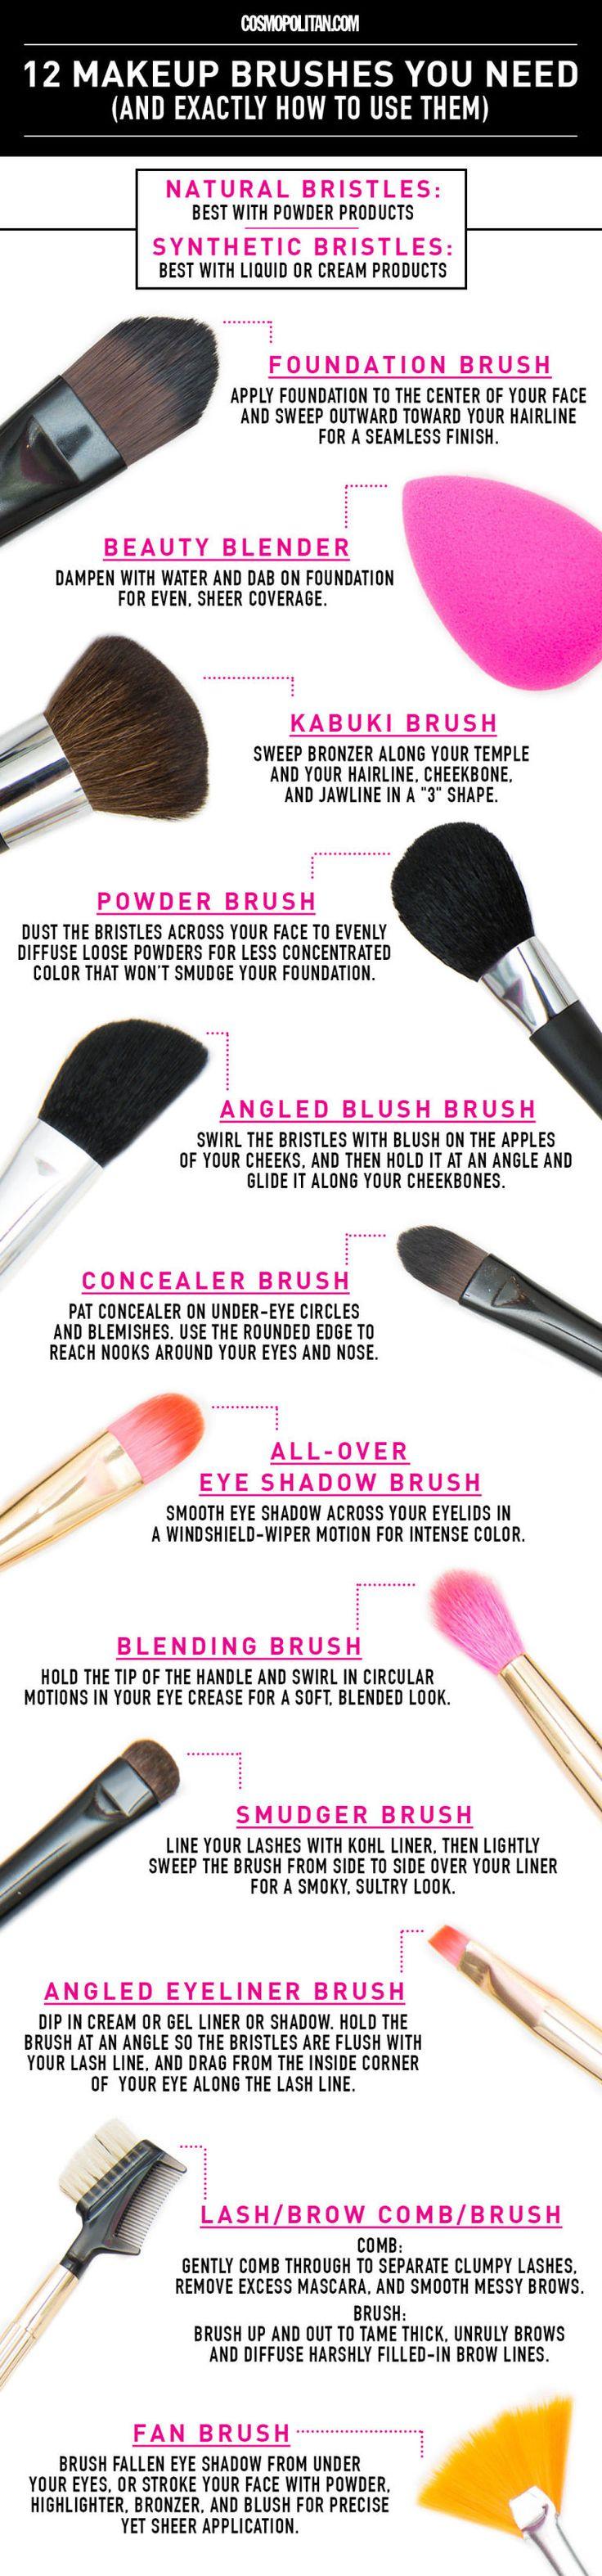 Hochzeit - 12 Makeup Brushes You Need And Exactly How To Use Them